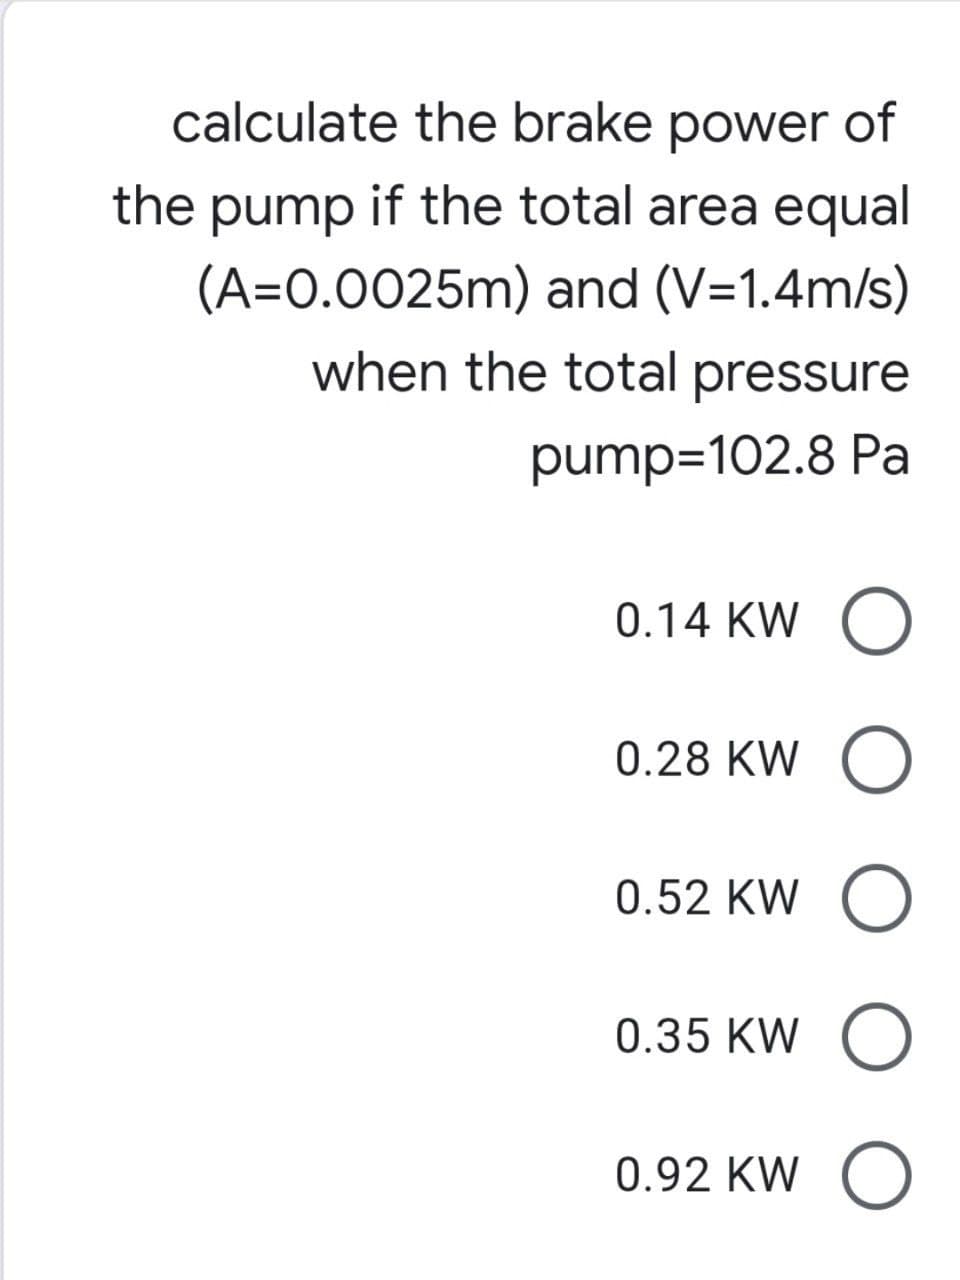 calculate the brake power of
the pump if the total area equal
(A=0.0025m) and (V=1.4m/s)
when the total pressure
pump=102.8 Pa
0.14 KW O
0.28 KW O
0.52 KW O
0.35 KW O
0.92 KW O
